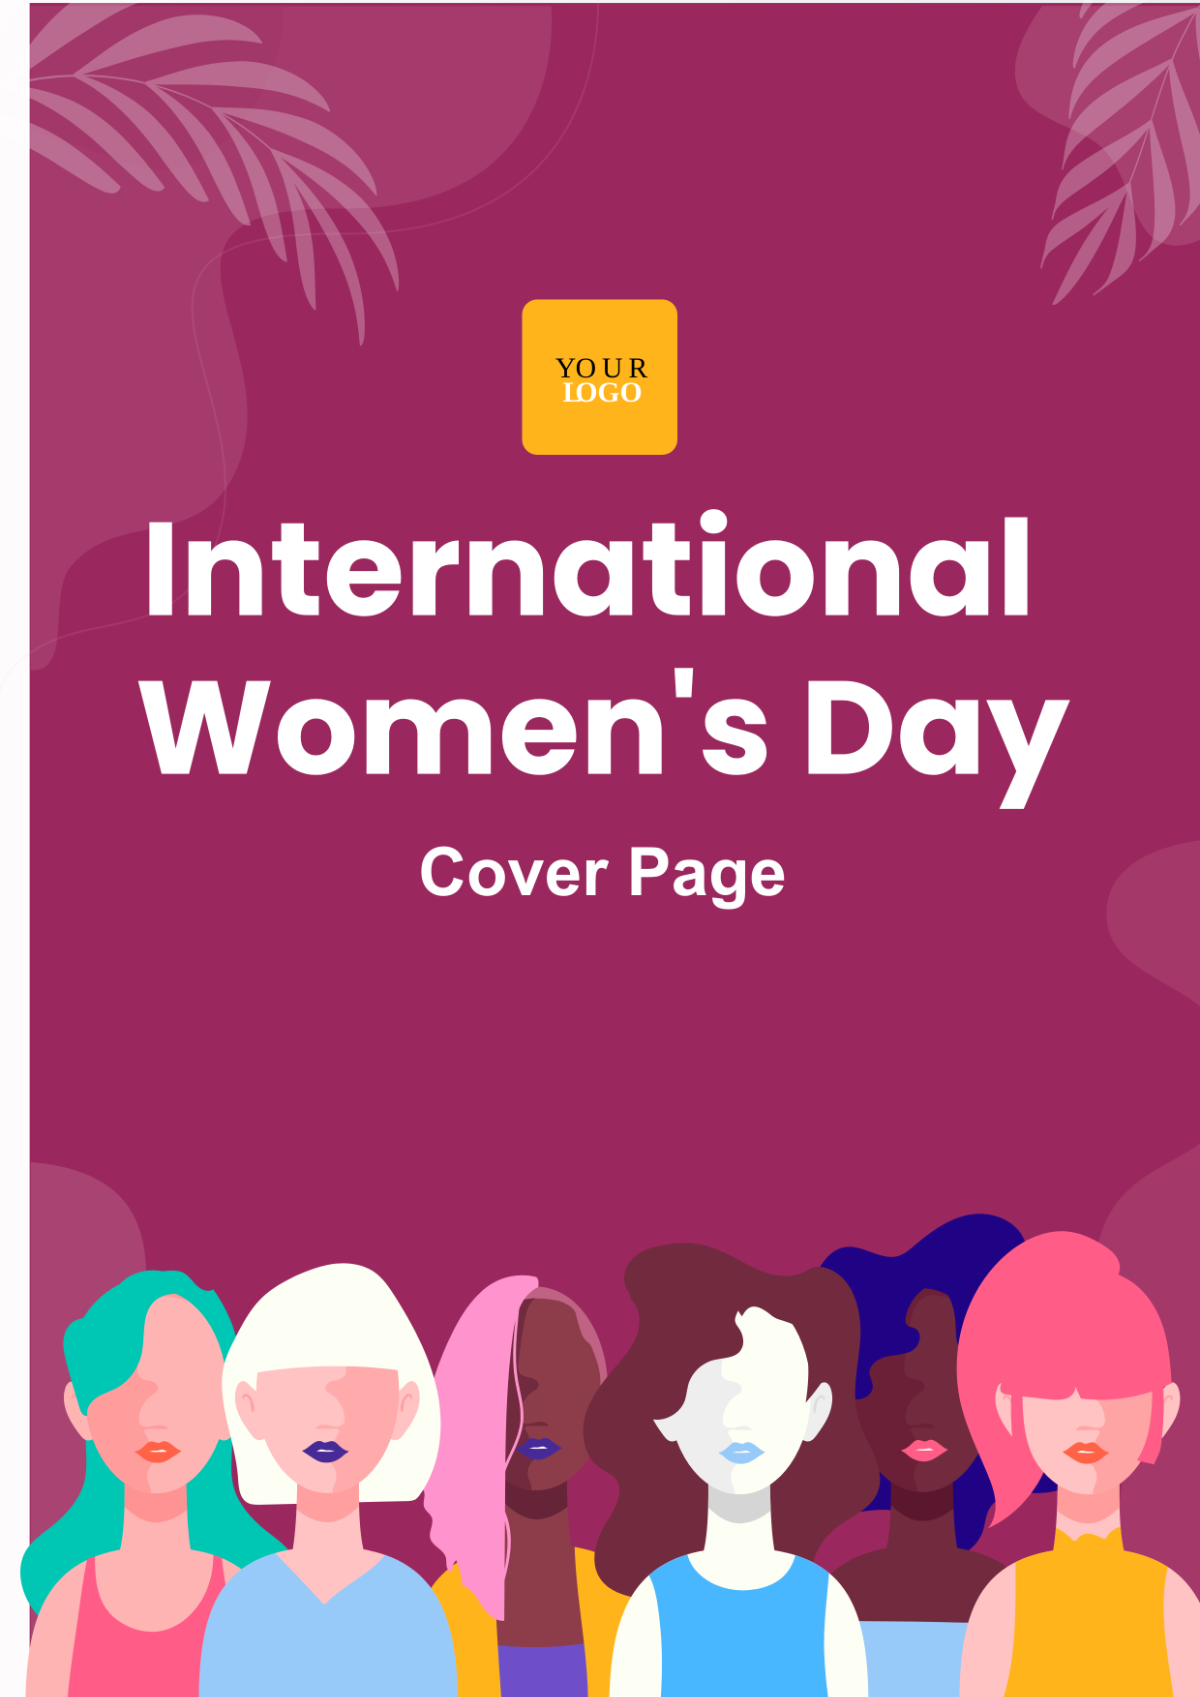 International Women's Day Cover Page Template